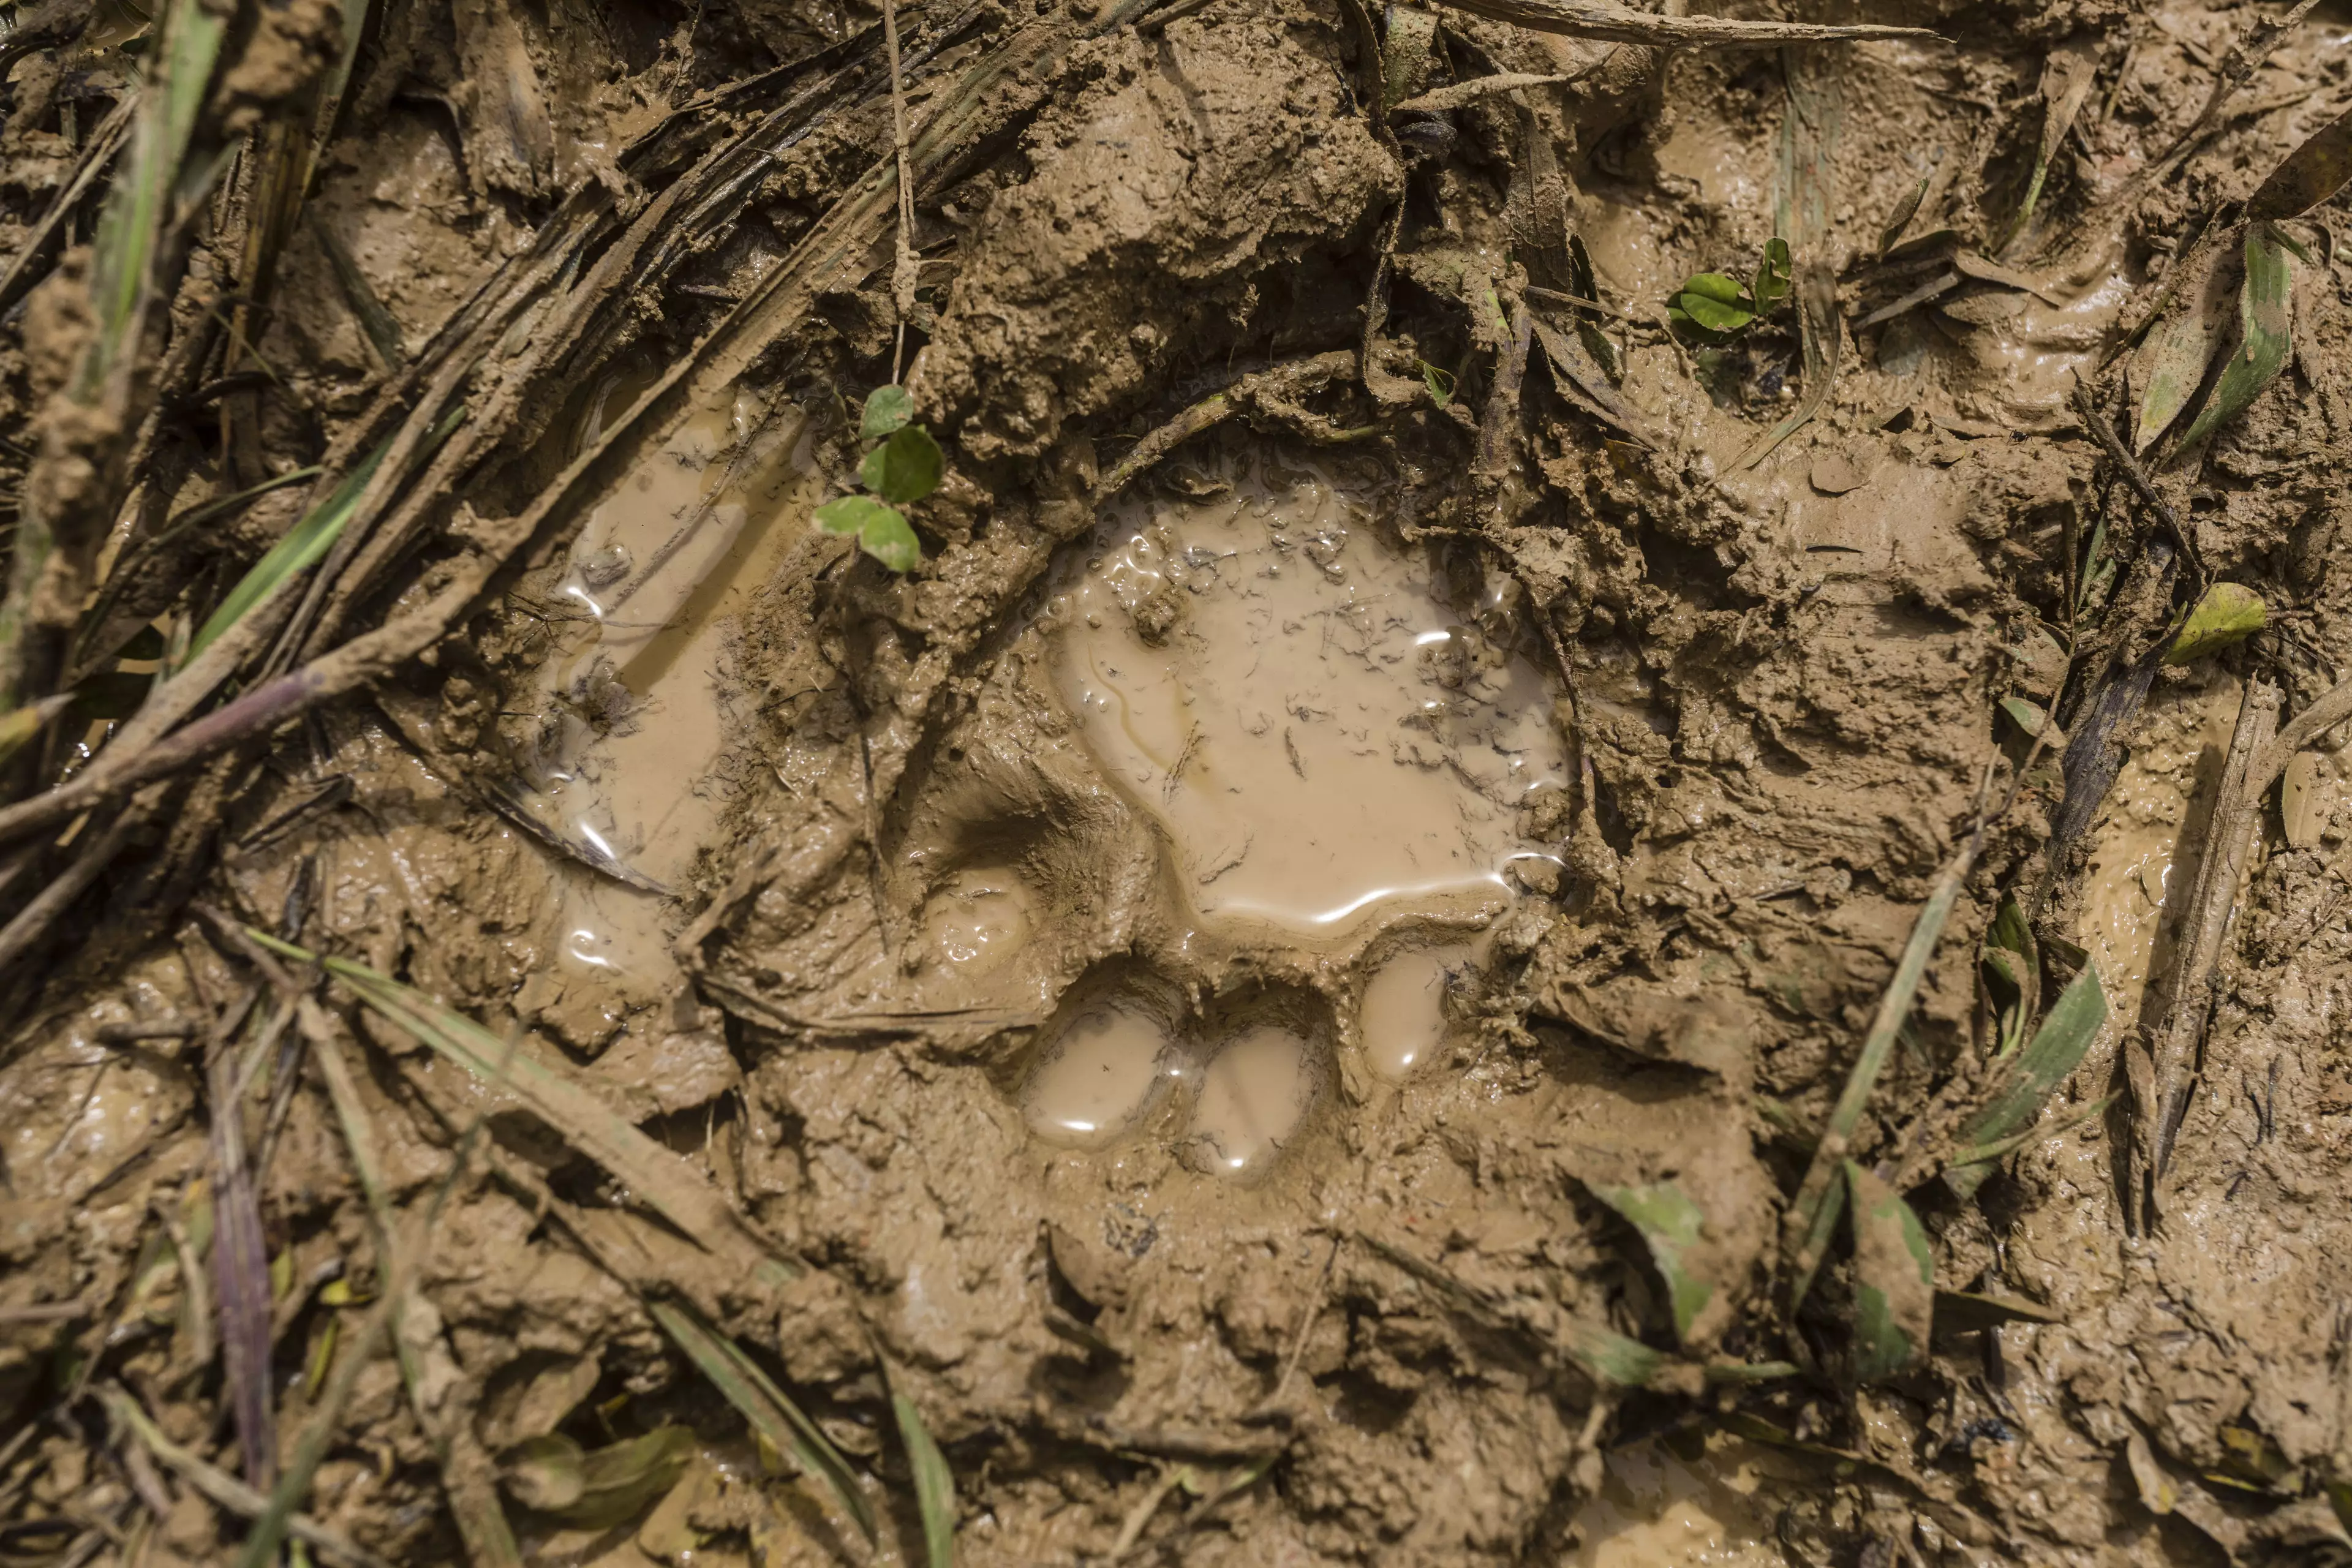 File photo of a cougar paw print.